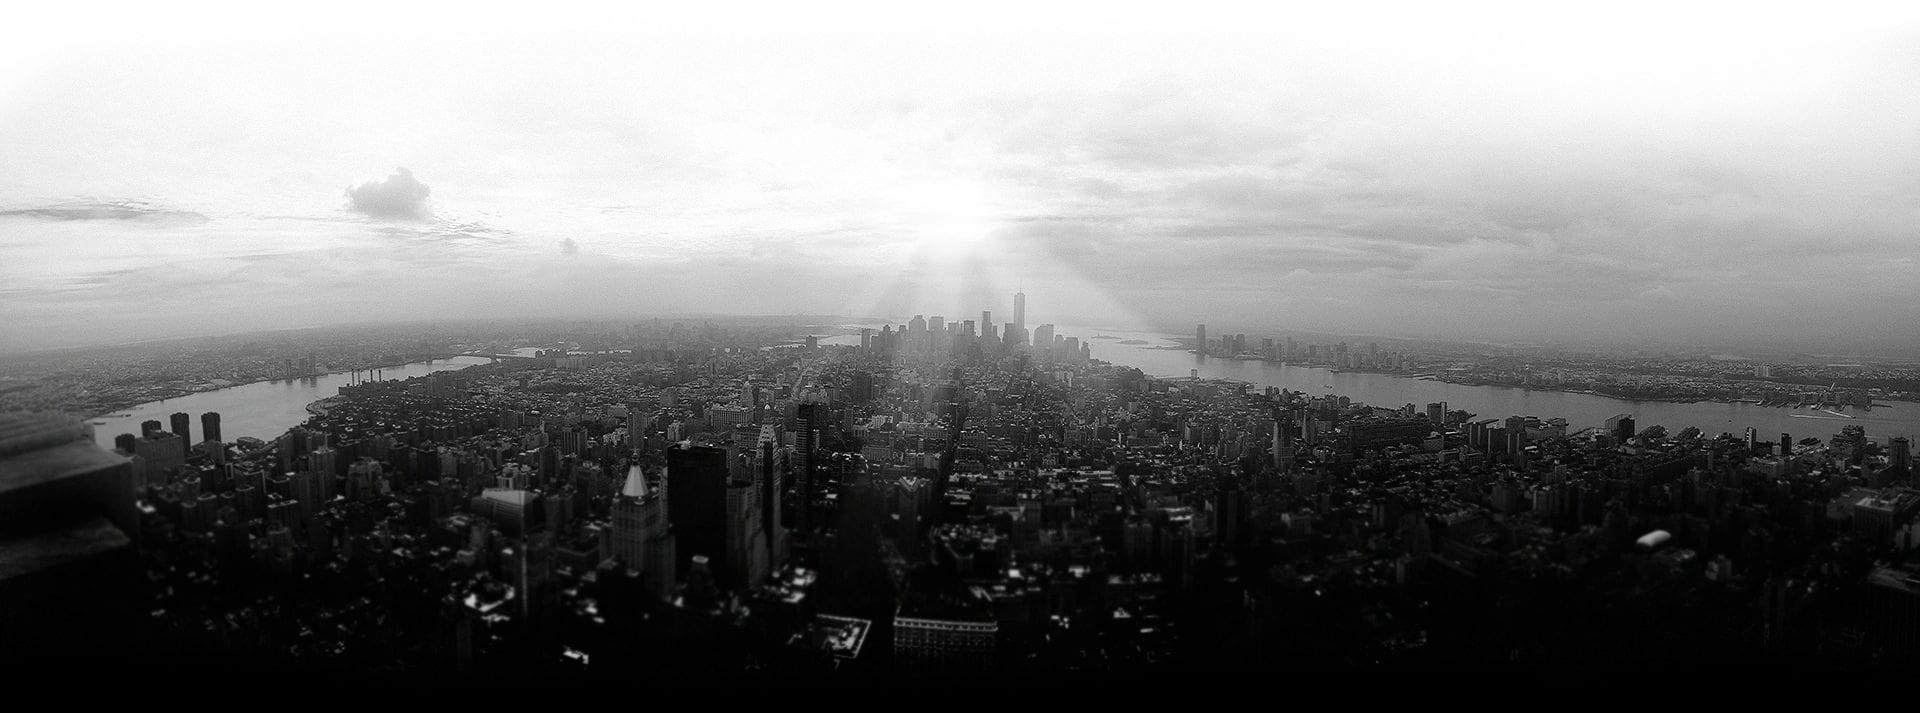 A black and white photo of the skyline of new york city.